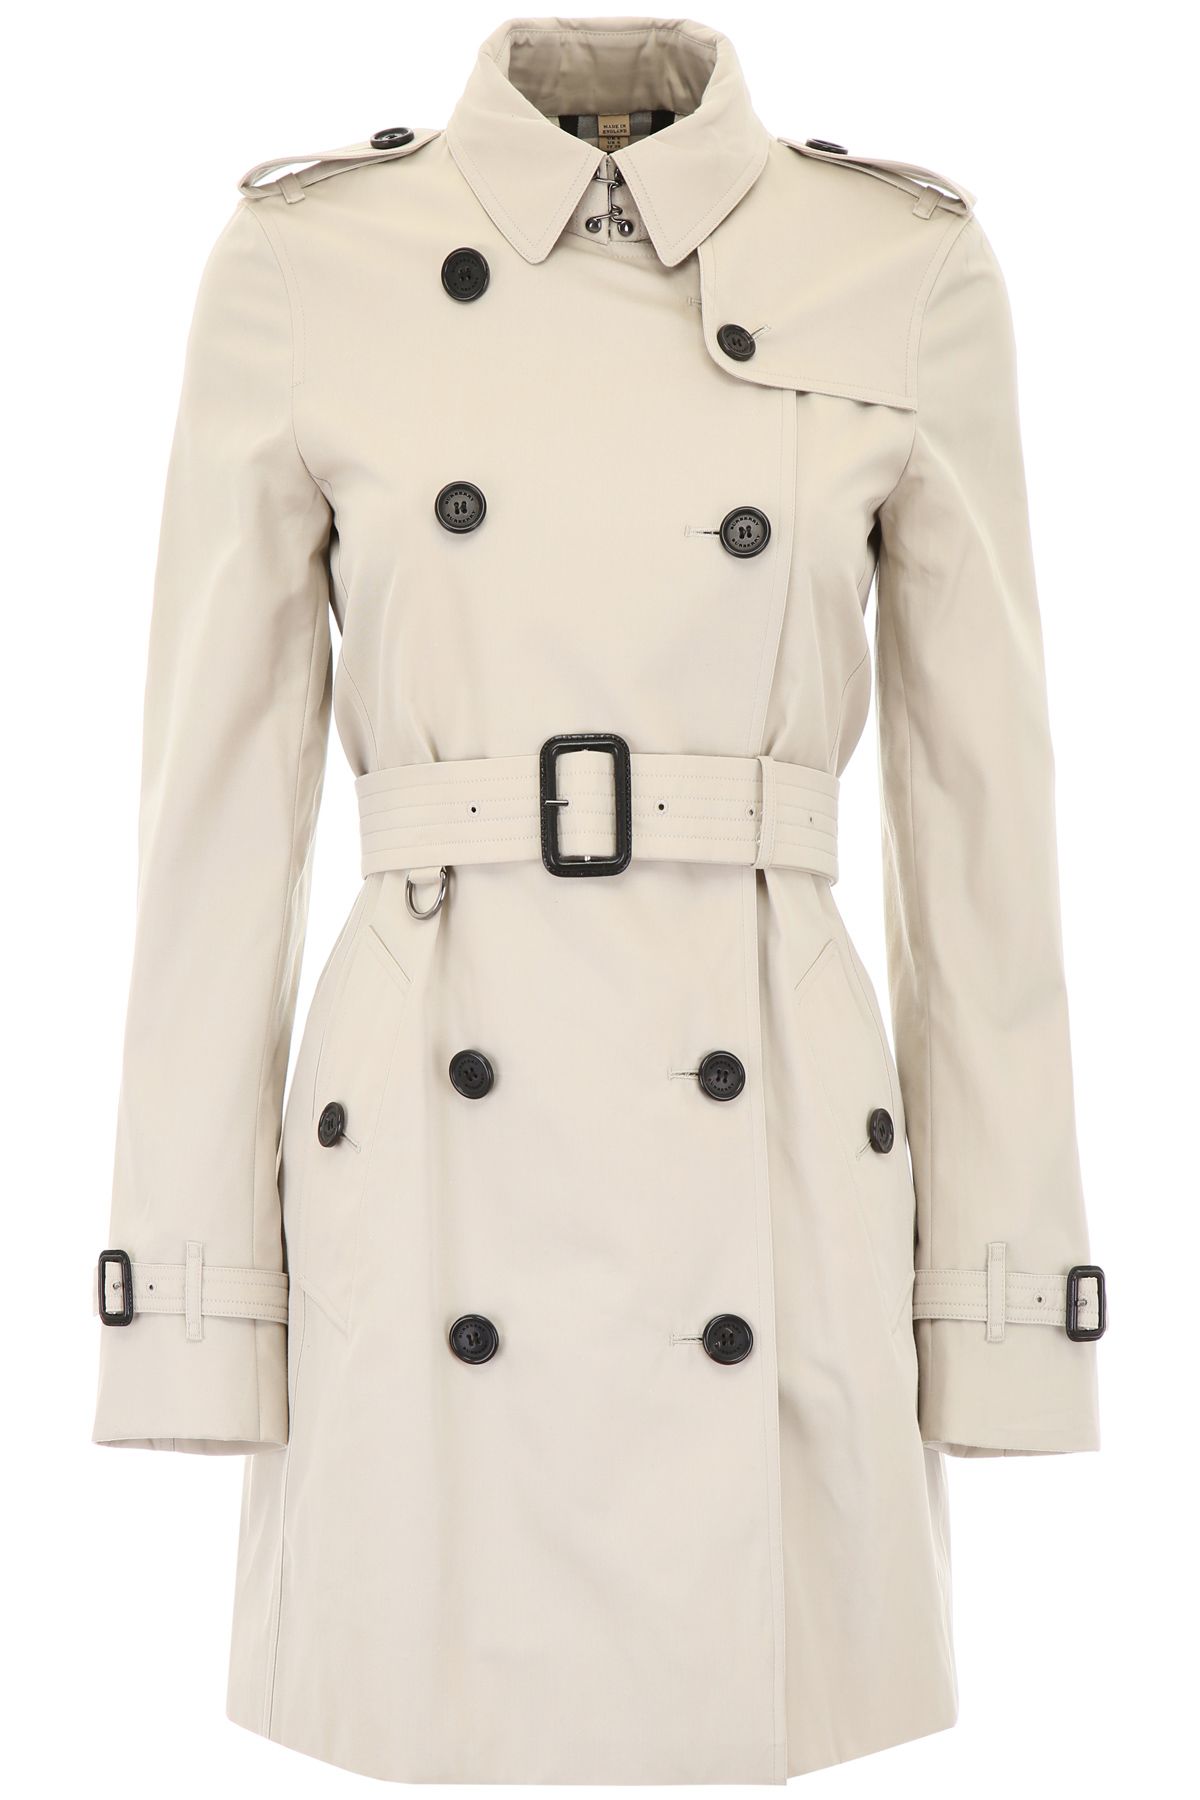 Burberry - Short Kensington Trench Coat | ABOUT ICONS